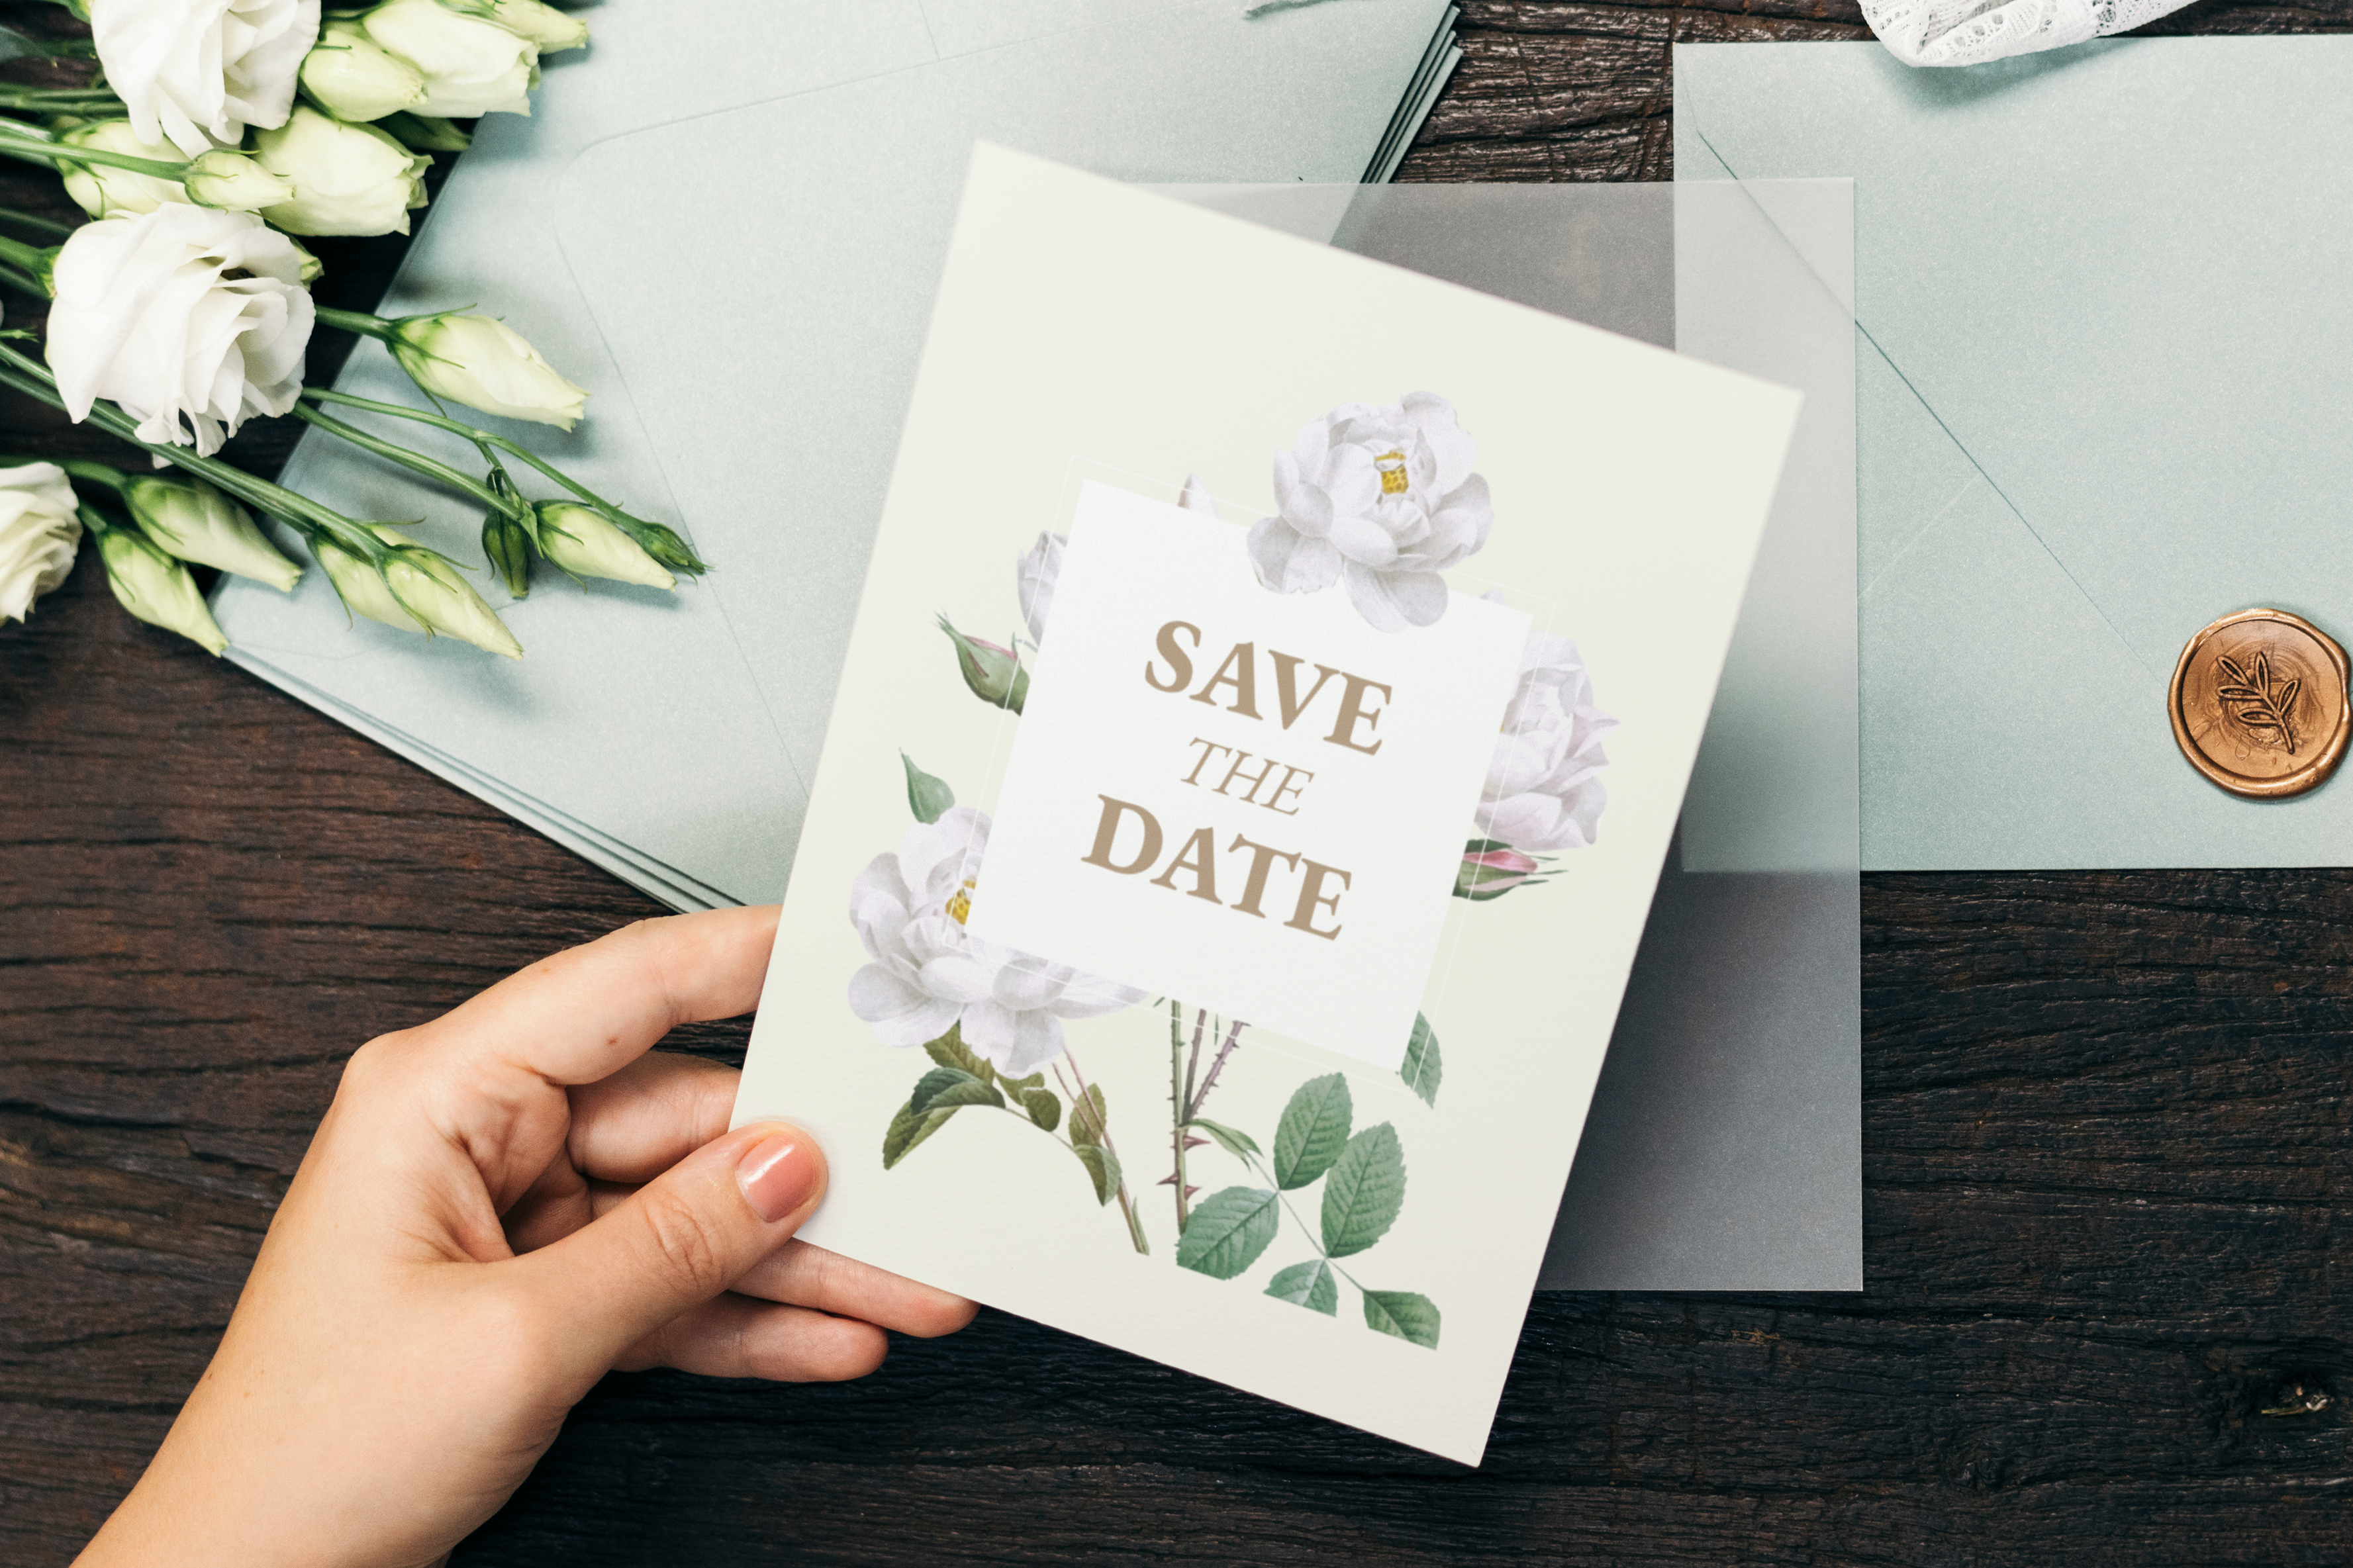 A person holding a wedding invitation card | Source: Shutterstock